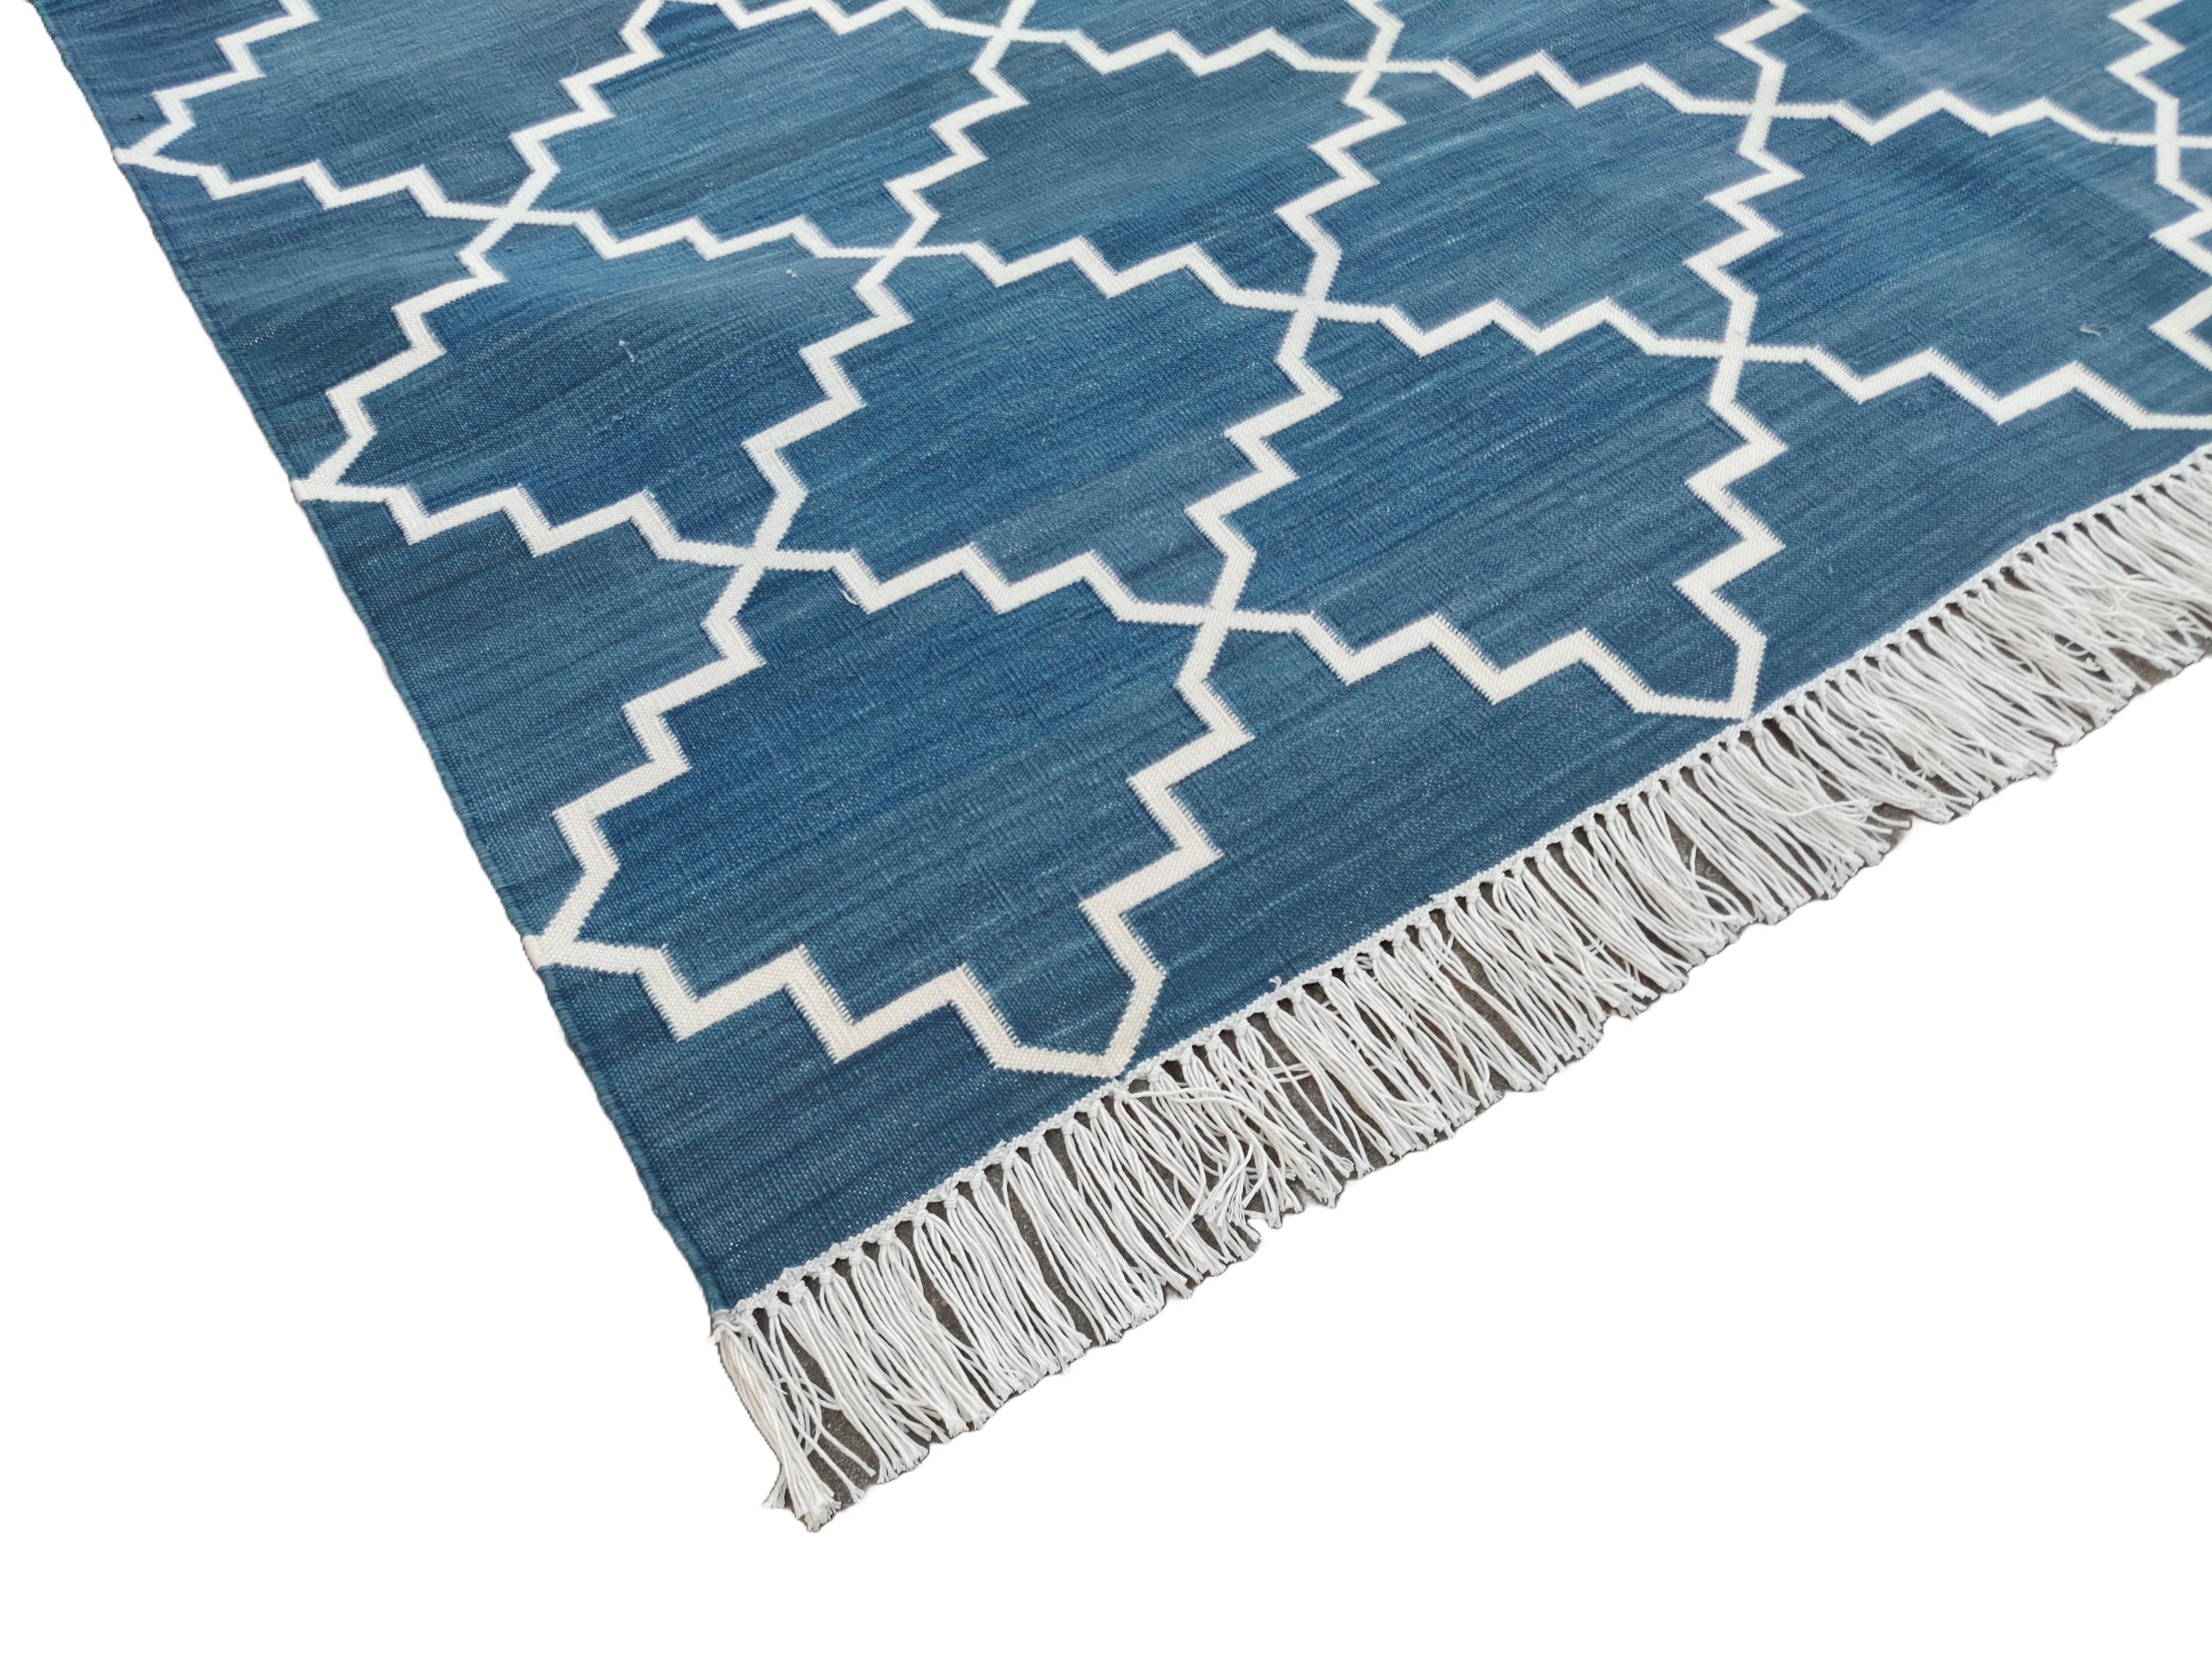 Hand-Woven Handmade Cotton Area Flat Weave Rug, Blue And White Geometric Indian Dhurrie Rug For Sale